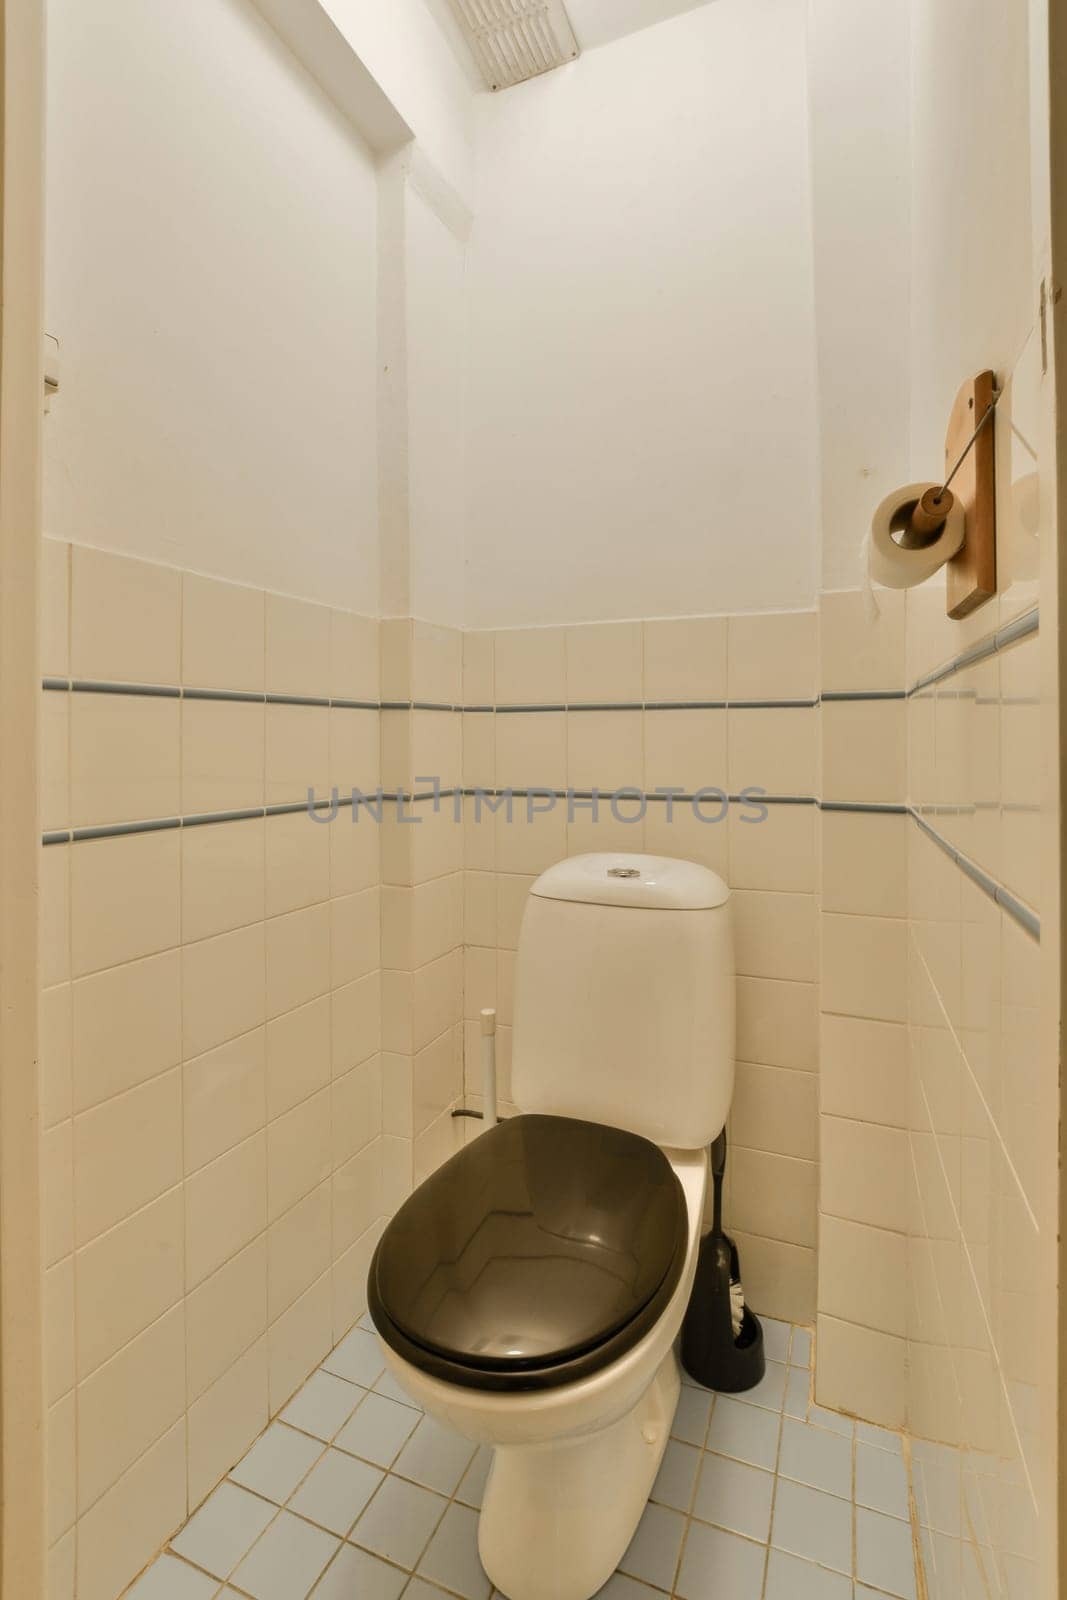 a white toilet in a bathroom with tile flooring and walls that have been stripped off to make room for the toilet